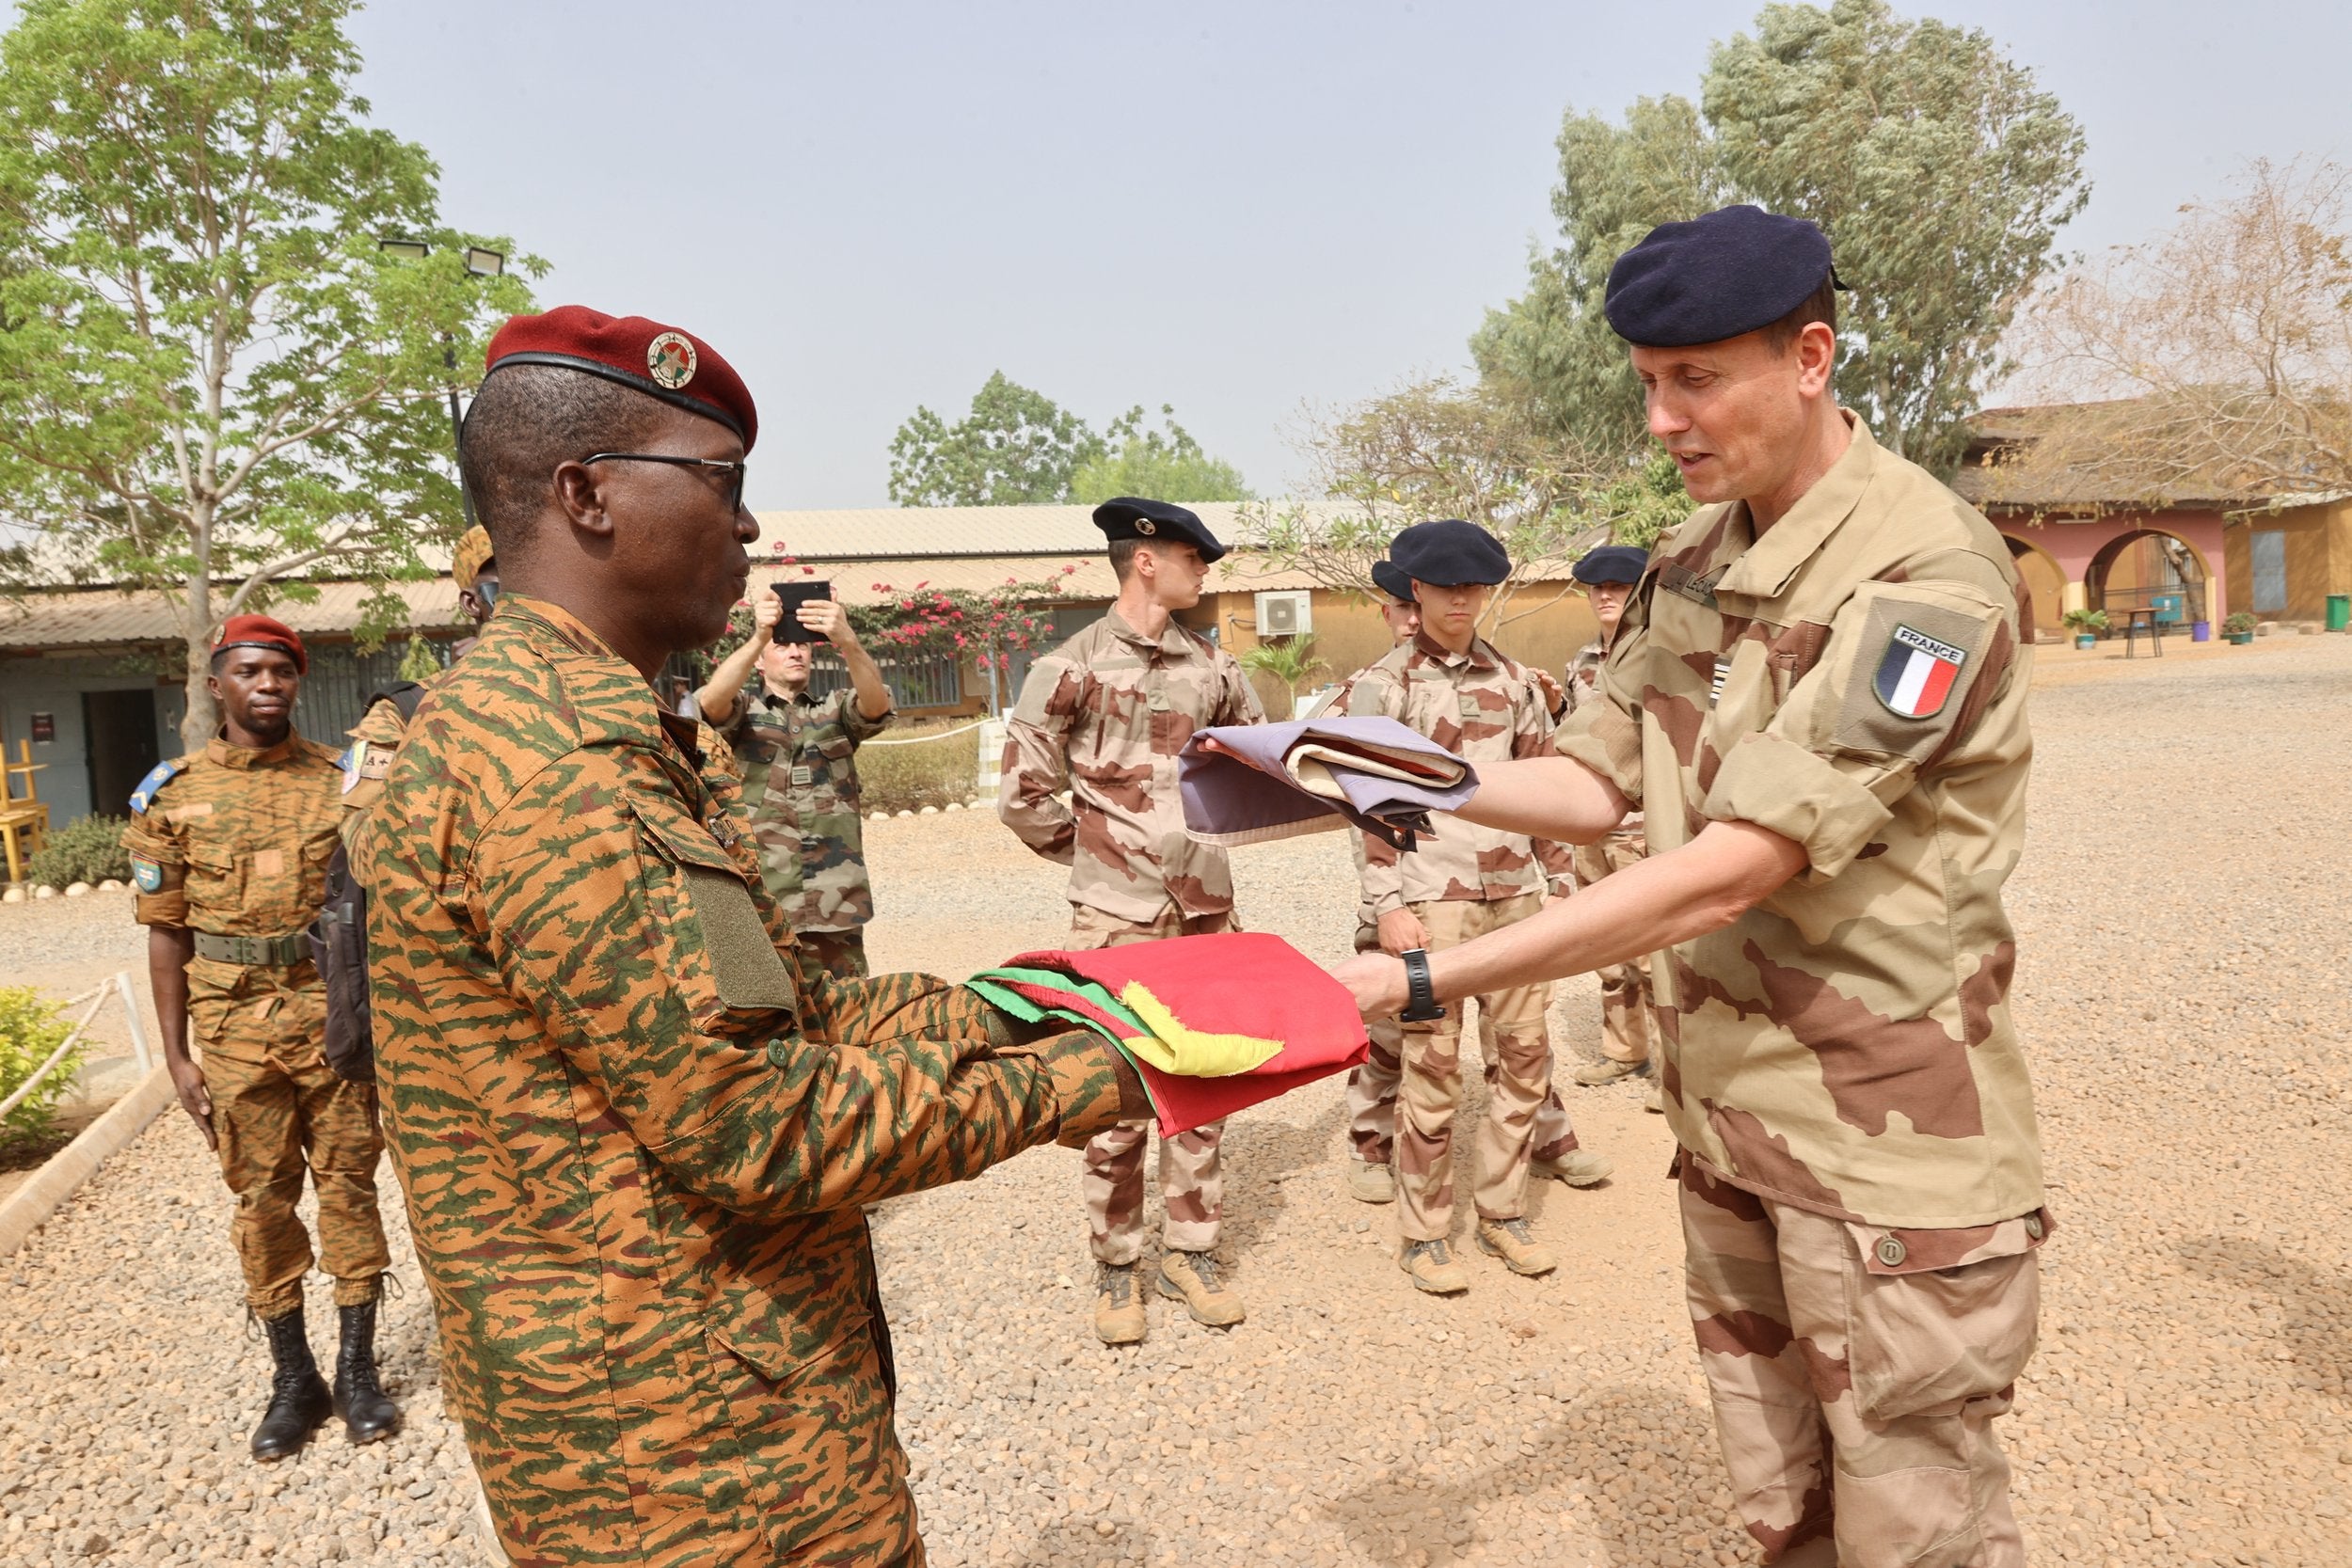 Burkina Faso marks official end of French military operations on its soil